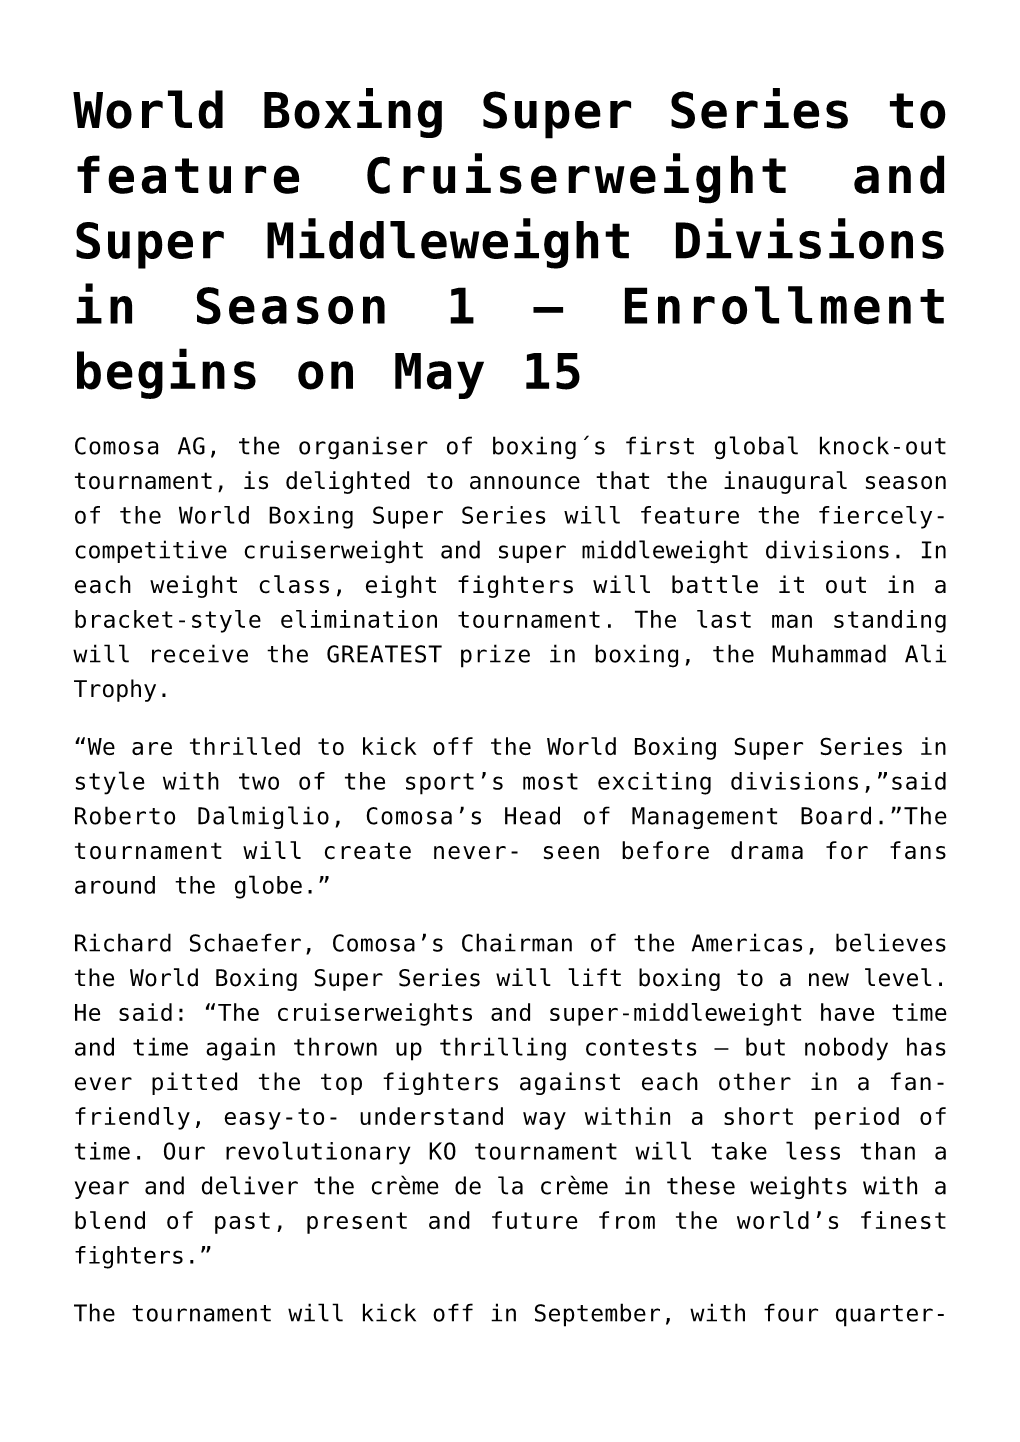 World Boxing Super Series to Feature Cruiserweight and Super Middleweight Divisions in Season 1 – Enrollment Begins on May 15